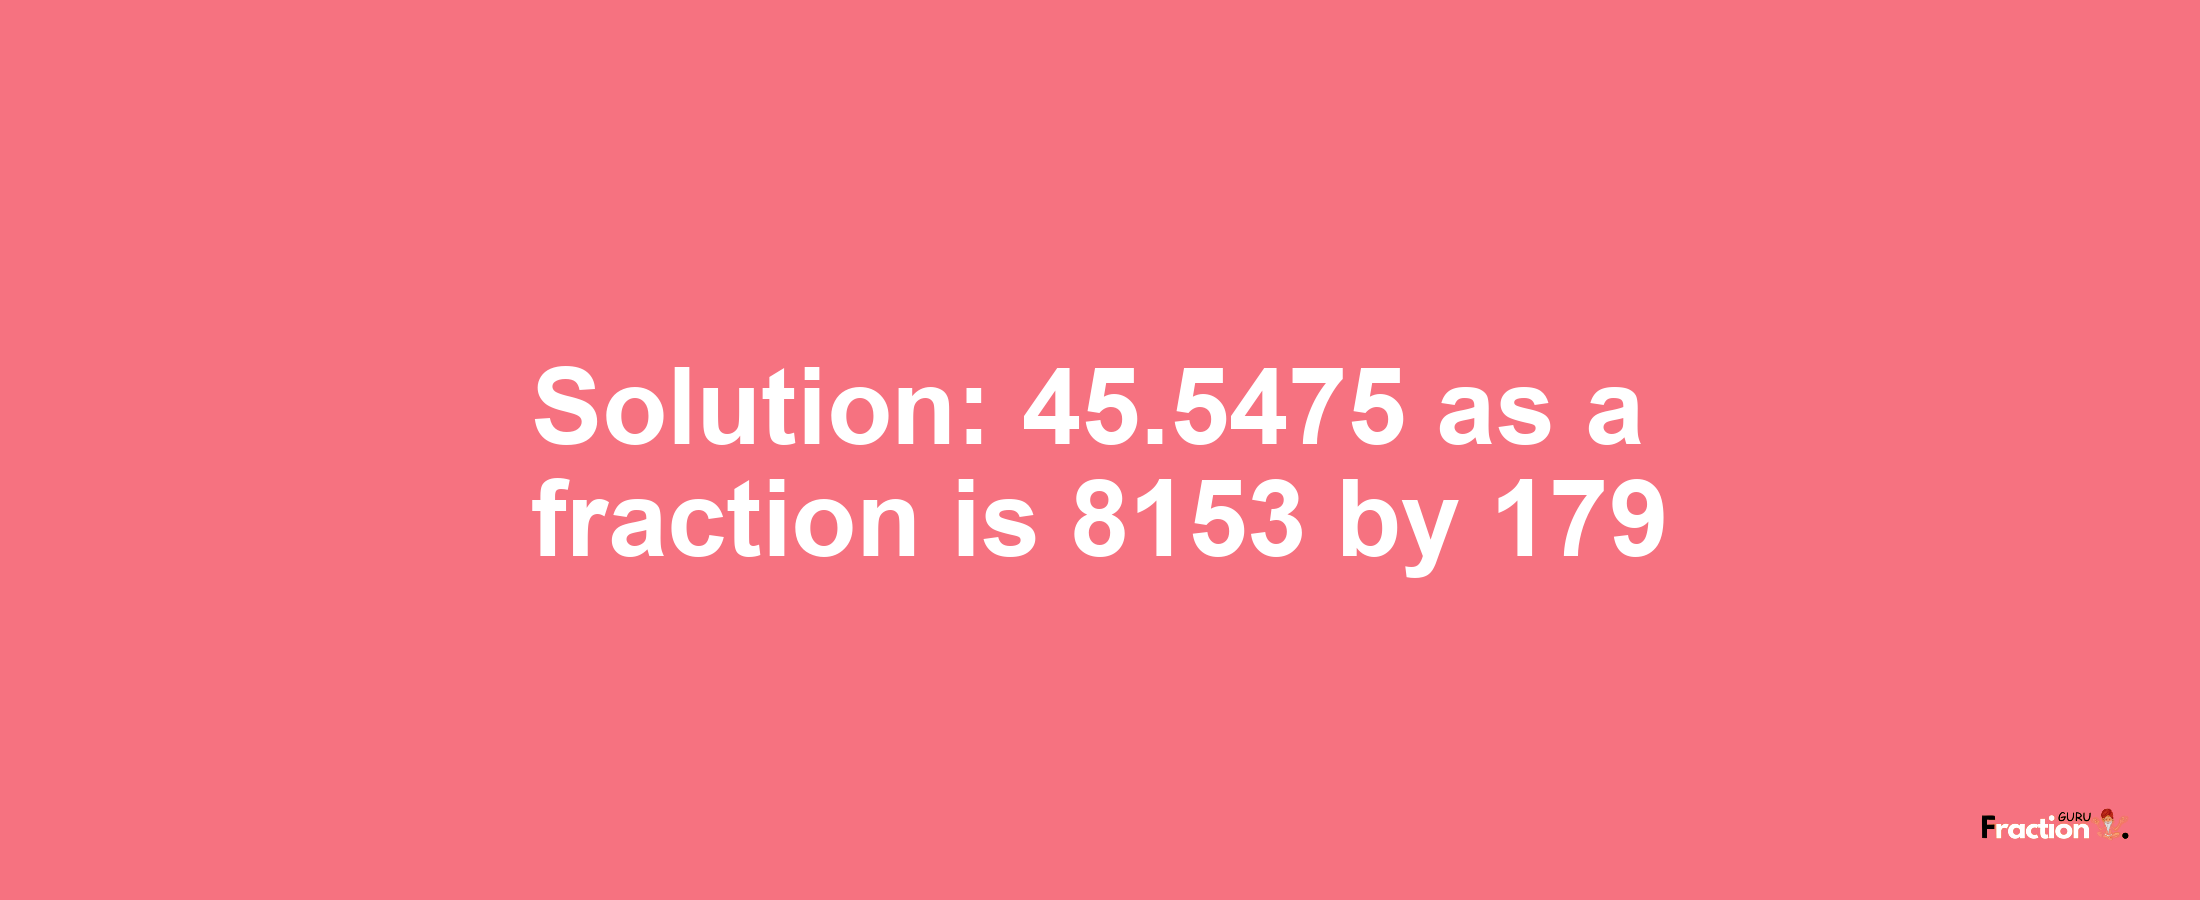 Solution:45.5475 as a fraction is 8153/179